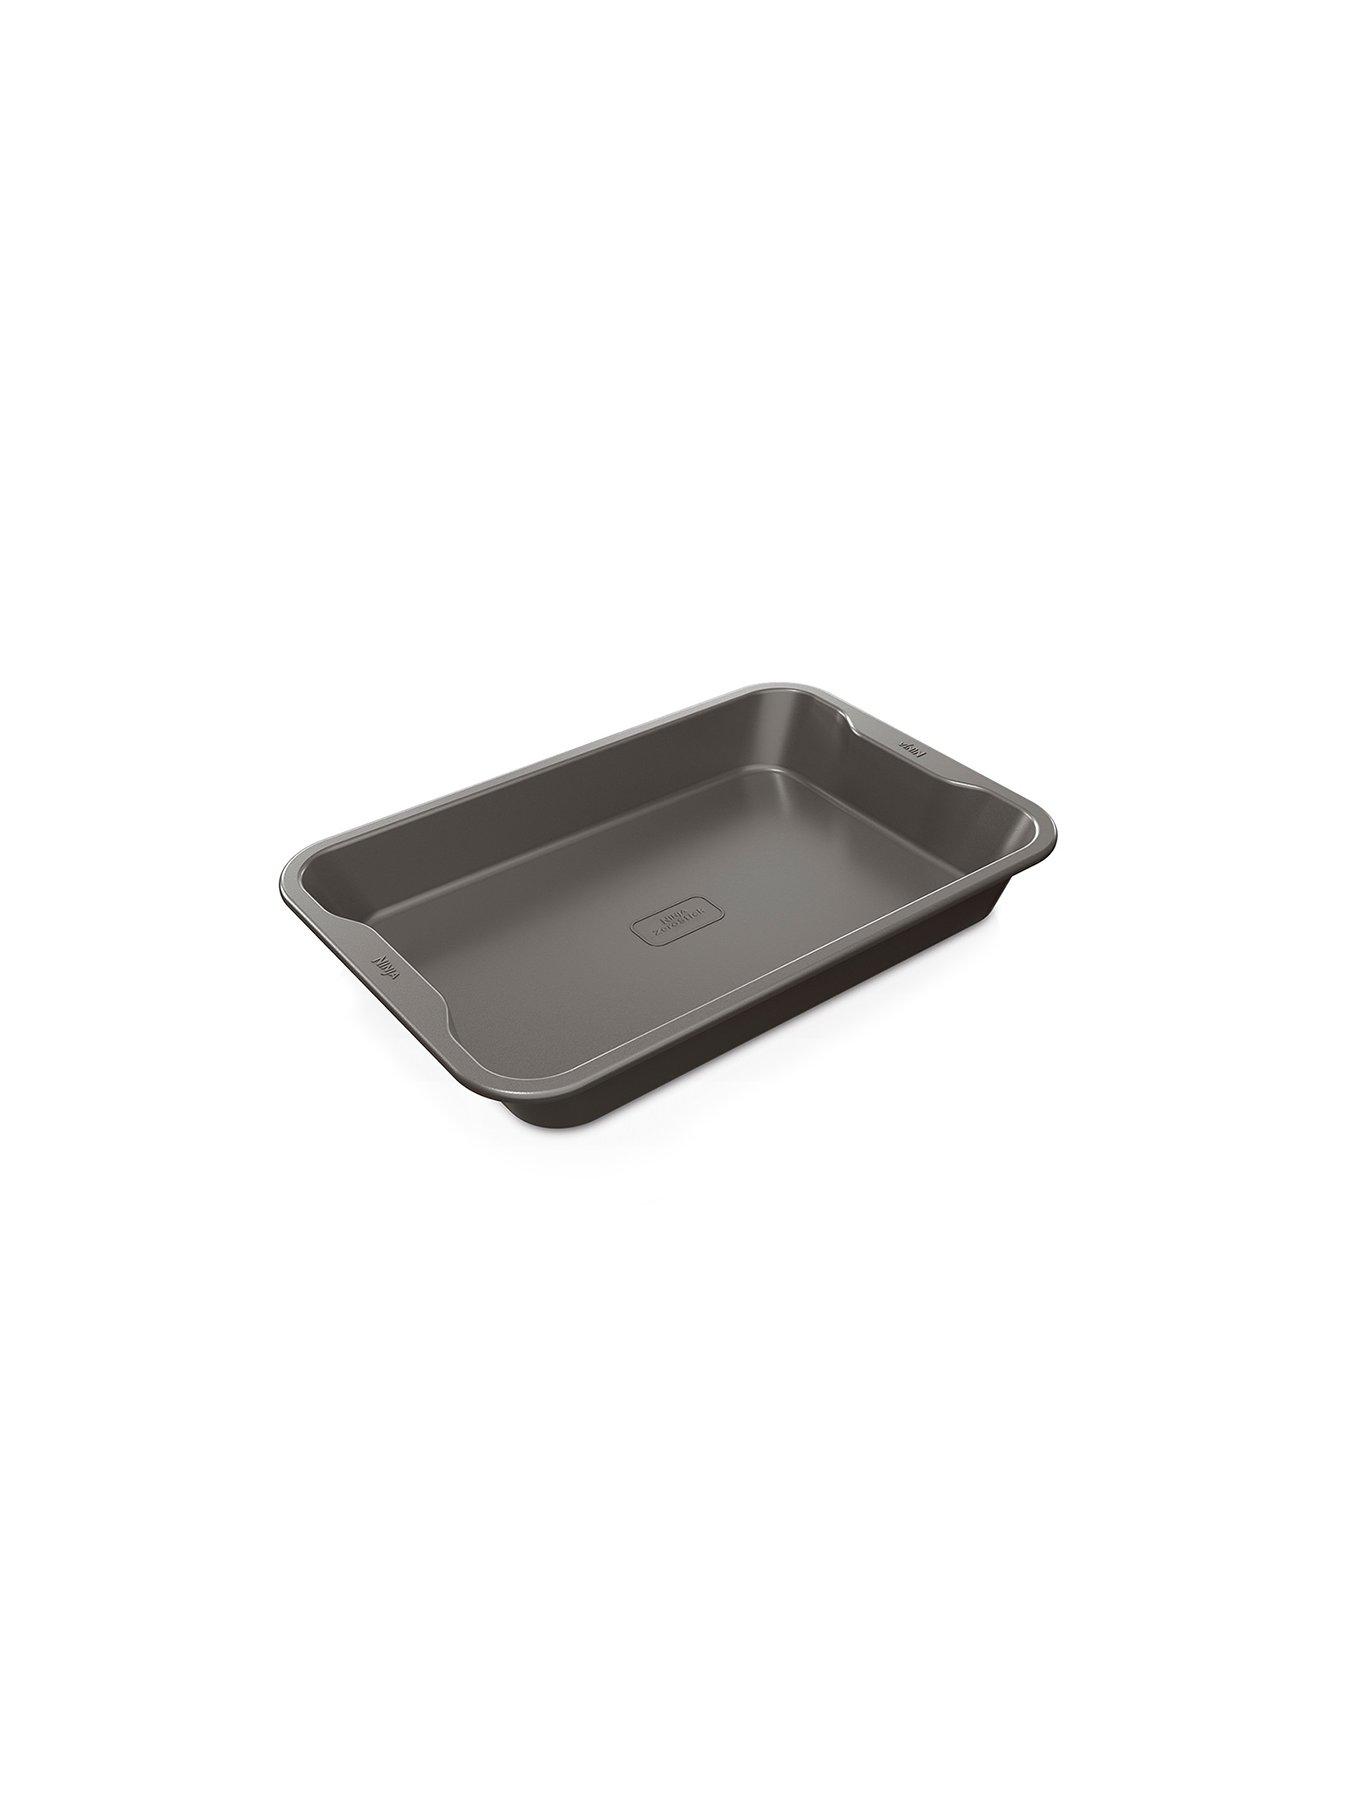 MasterClass Baking Tray, Non-Stick Oven Tray for Baking and Roasting,  Carbon Steel, 24 x 18cm, Grey